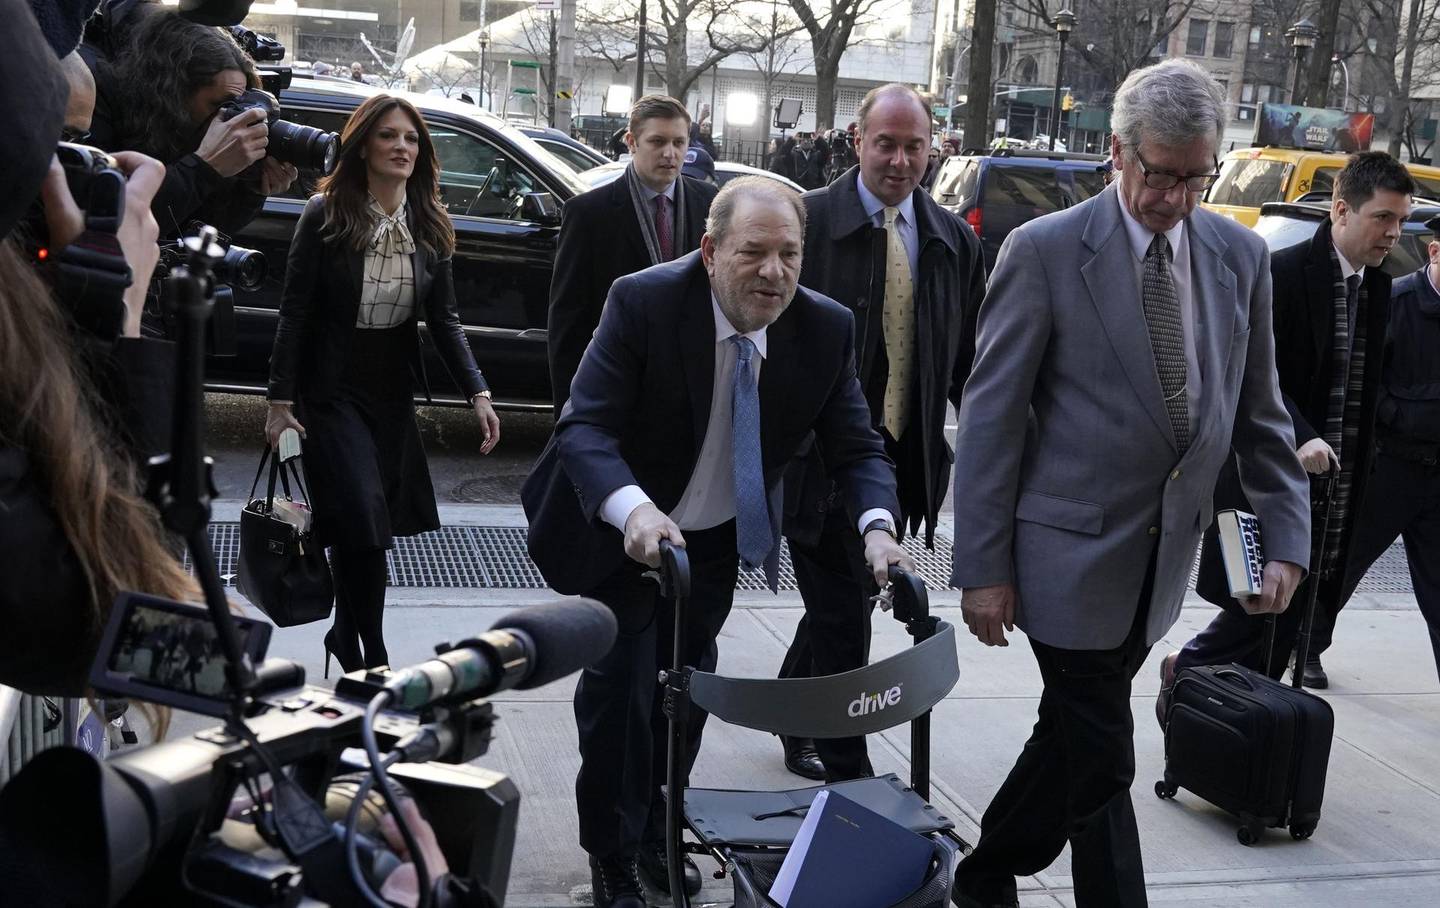 Harvey Weinstein arrives at the Manhattan Criminal Court, on February 24, 2020 in New York City. The jury in Harvey Weinstein's rape trial hinted it was struggling to reach agreement on the most serious charge of predatory sexual assault as day four of deliberations ended February 21, 2020 without a verdict. The 12 jurors asked New York state Judge James Burke whether they could be hung on one or both of the top counts but unanimous on the three lesser counts. The disgraced movie mogul, 67, faces life in prison if the jury of seven men and five women convict him of a variety of sexual misconduct charges in New York.
 / AFP / TIMOTHY A. CLARY
